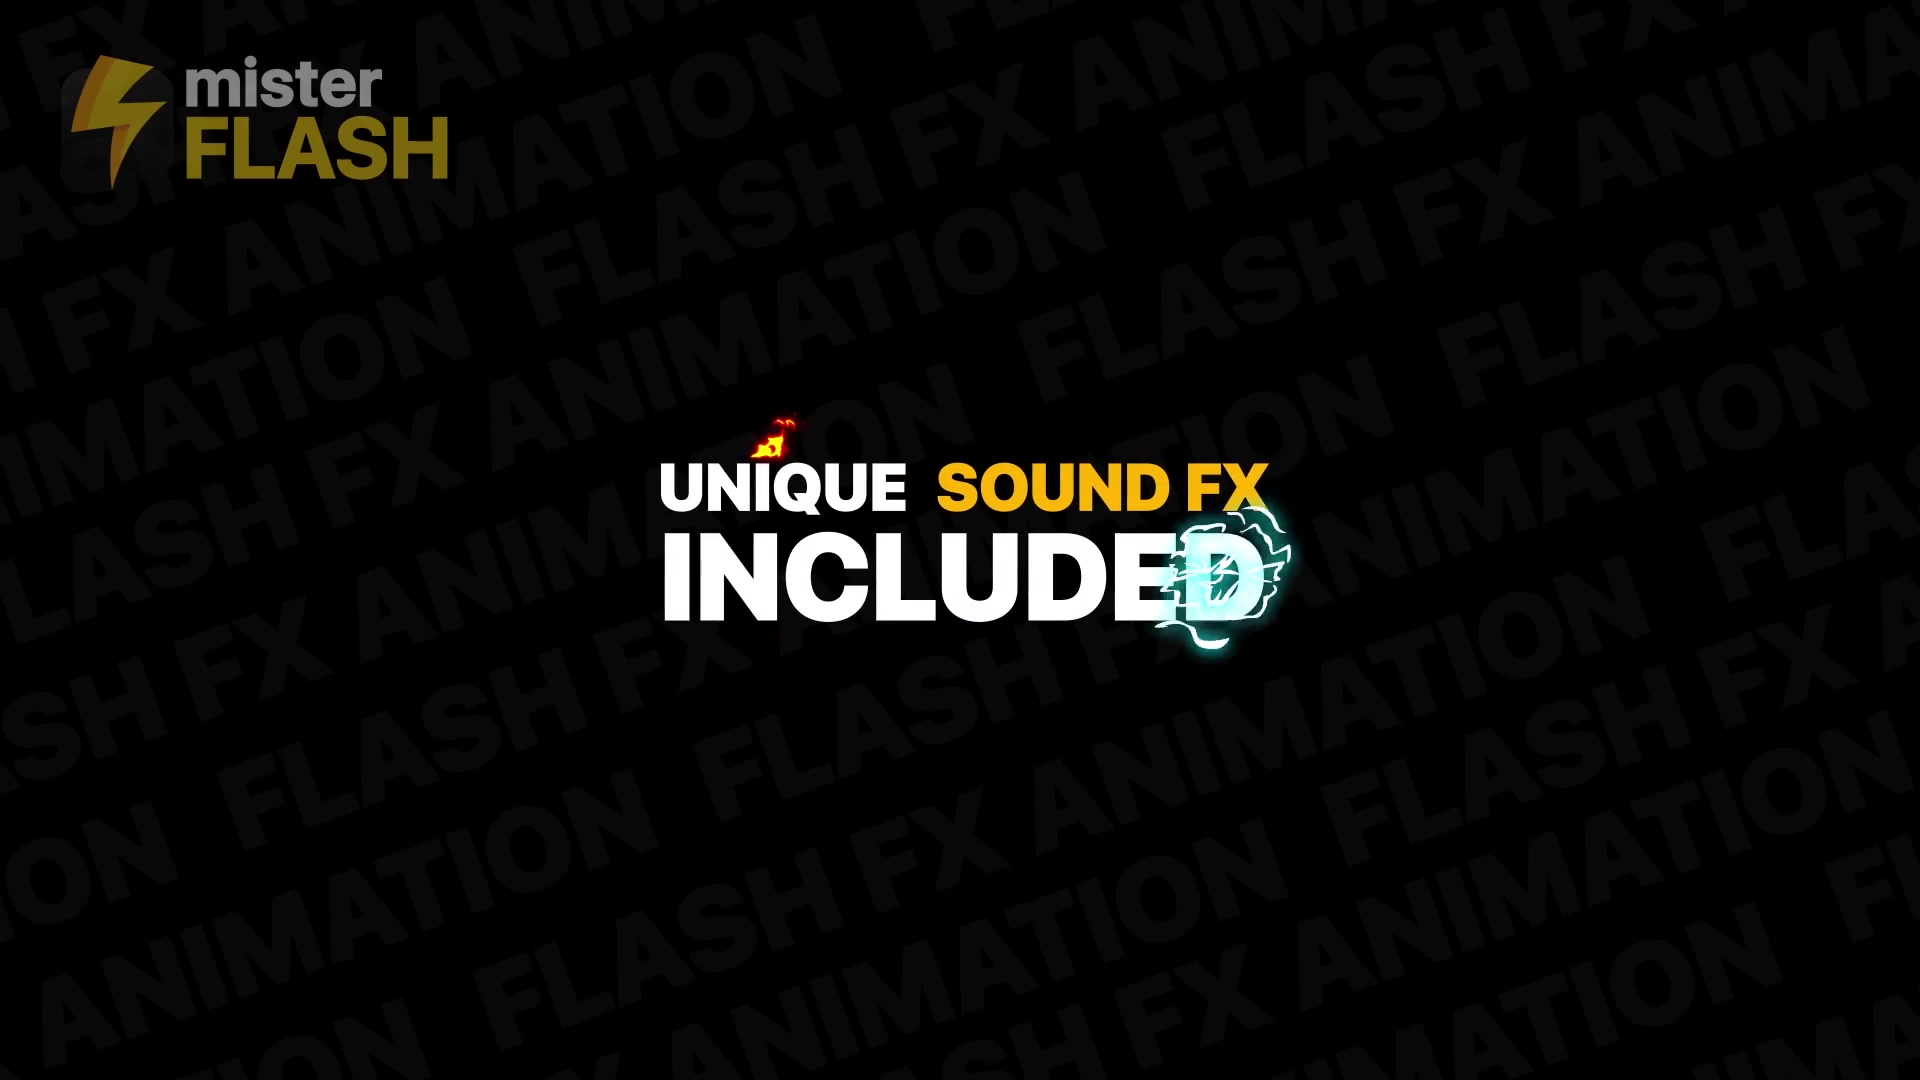 Flash FX Elements Pack 01 - Download Videohive 23211856